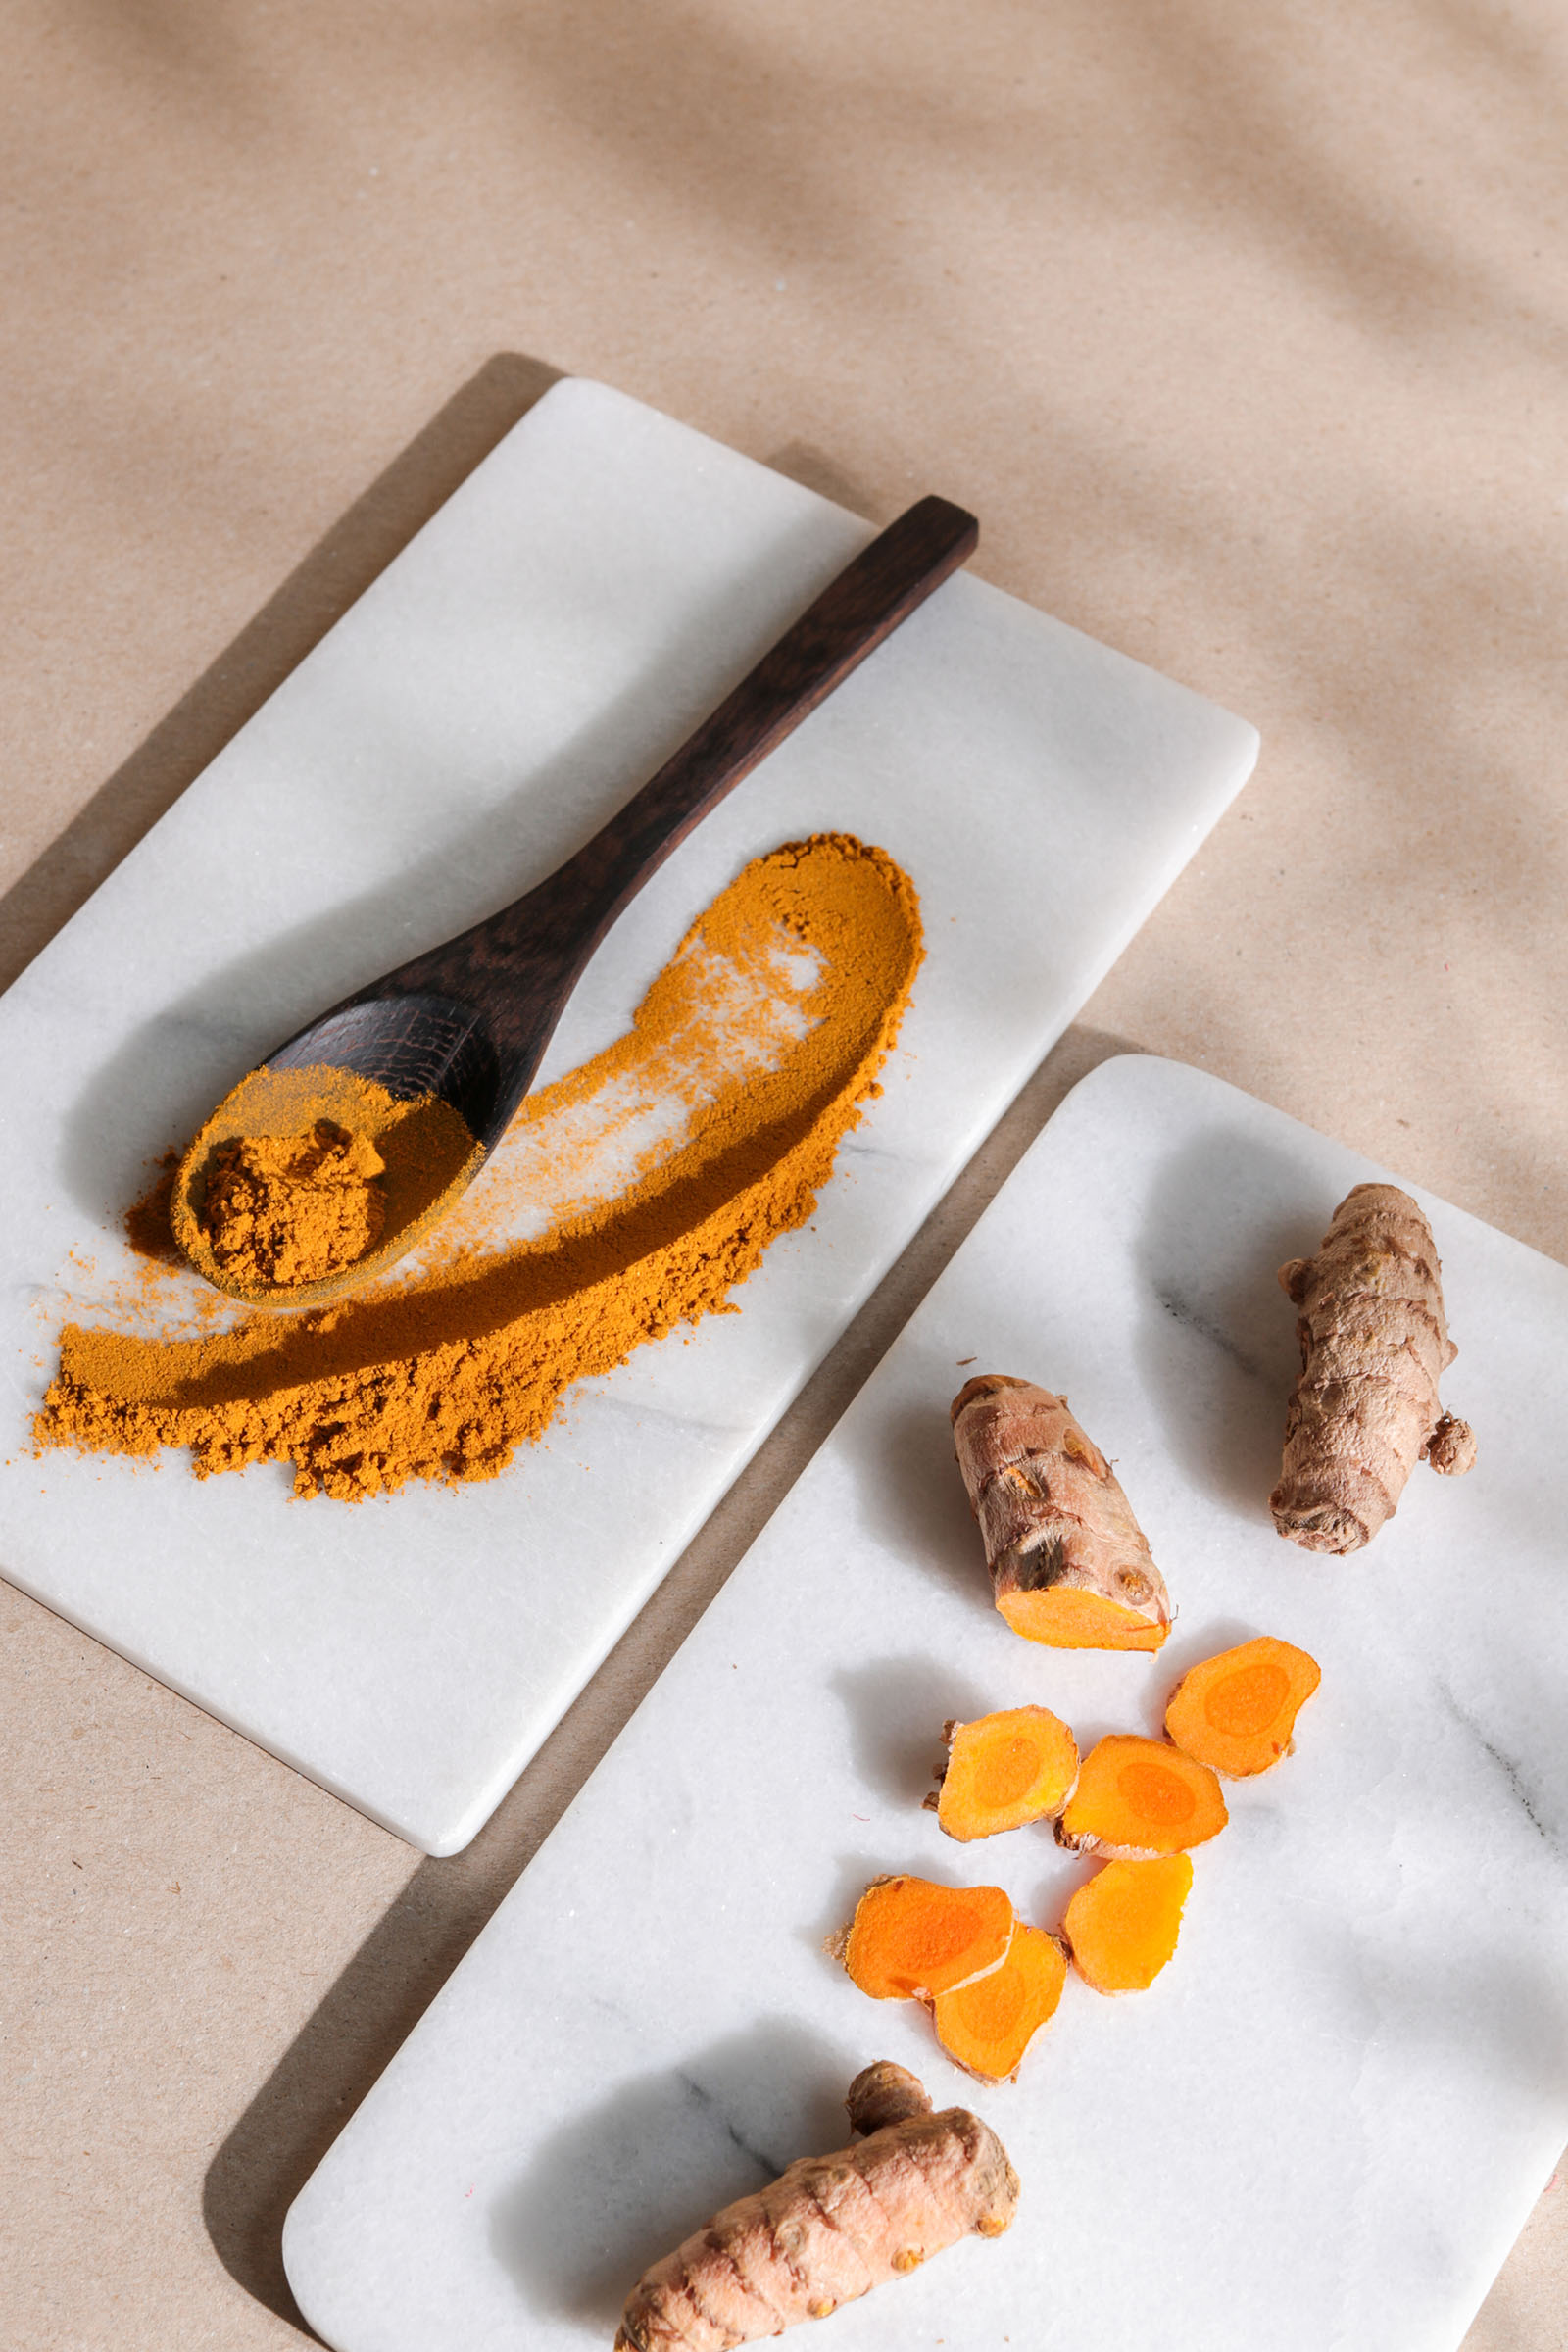 Beauty DIY: How to remove turmeric stains from your skin